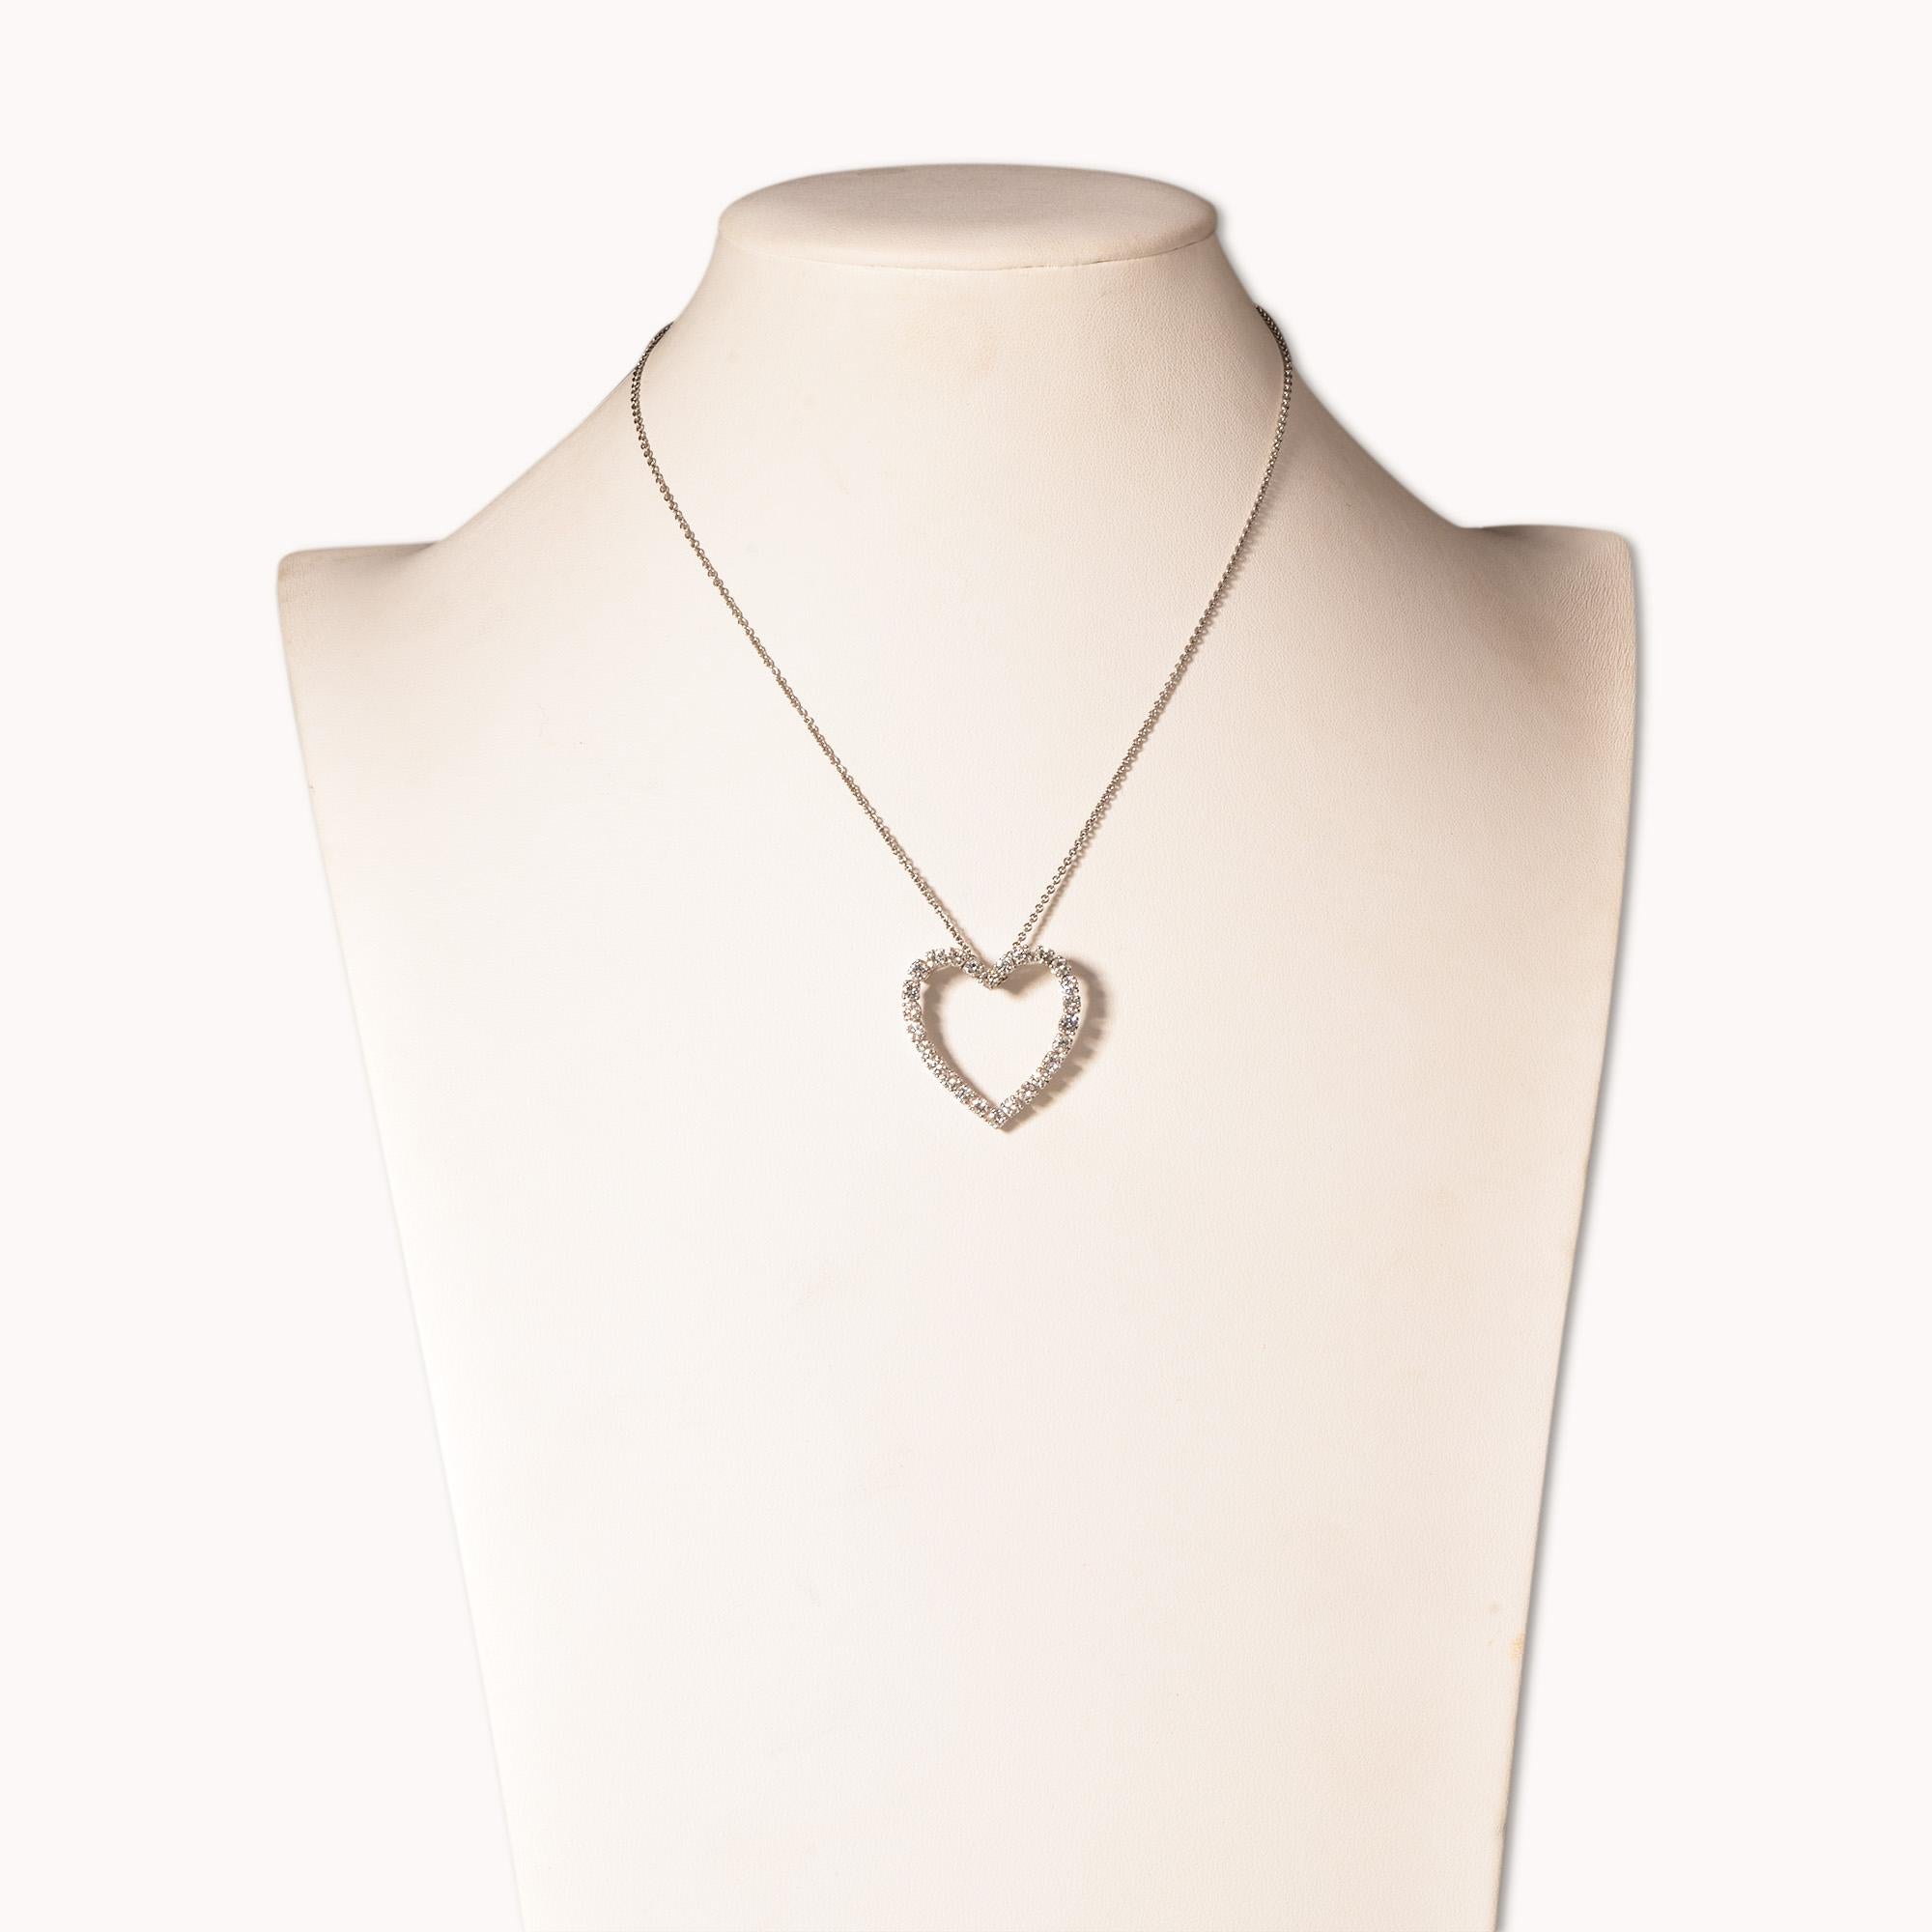 An absolutely dazzling open heart diamond pendant necklace in 14k white gold. This beautiful necklace would make an excellent anniversary or valentines day gift. 

Features 26 brilliant diamonds, each approximately .10 CT, prong-set in a timeless